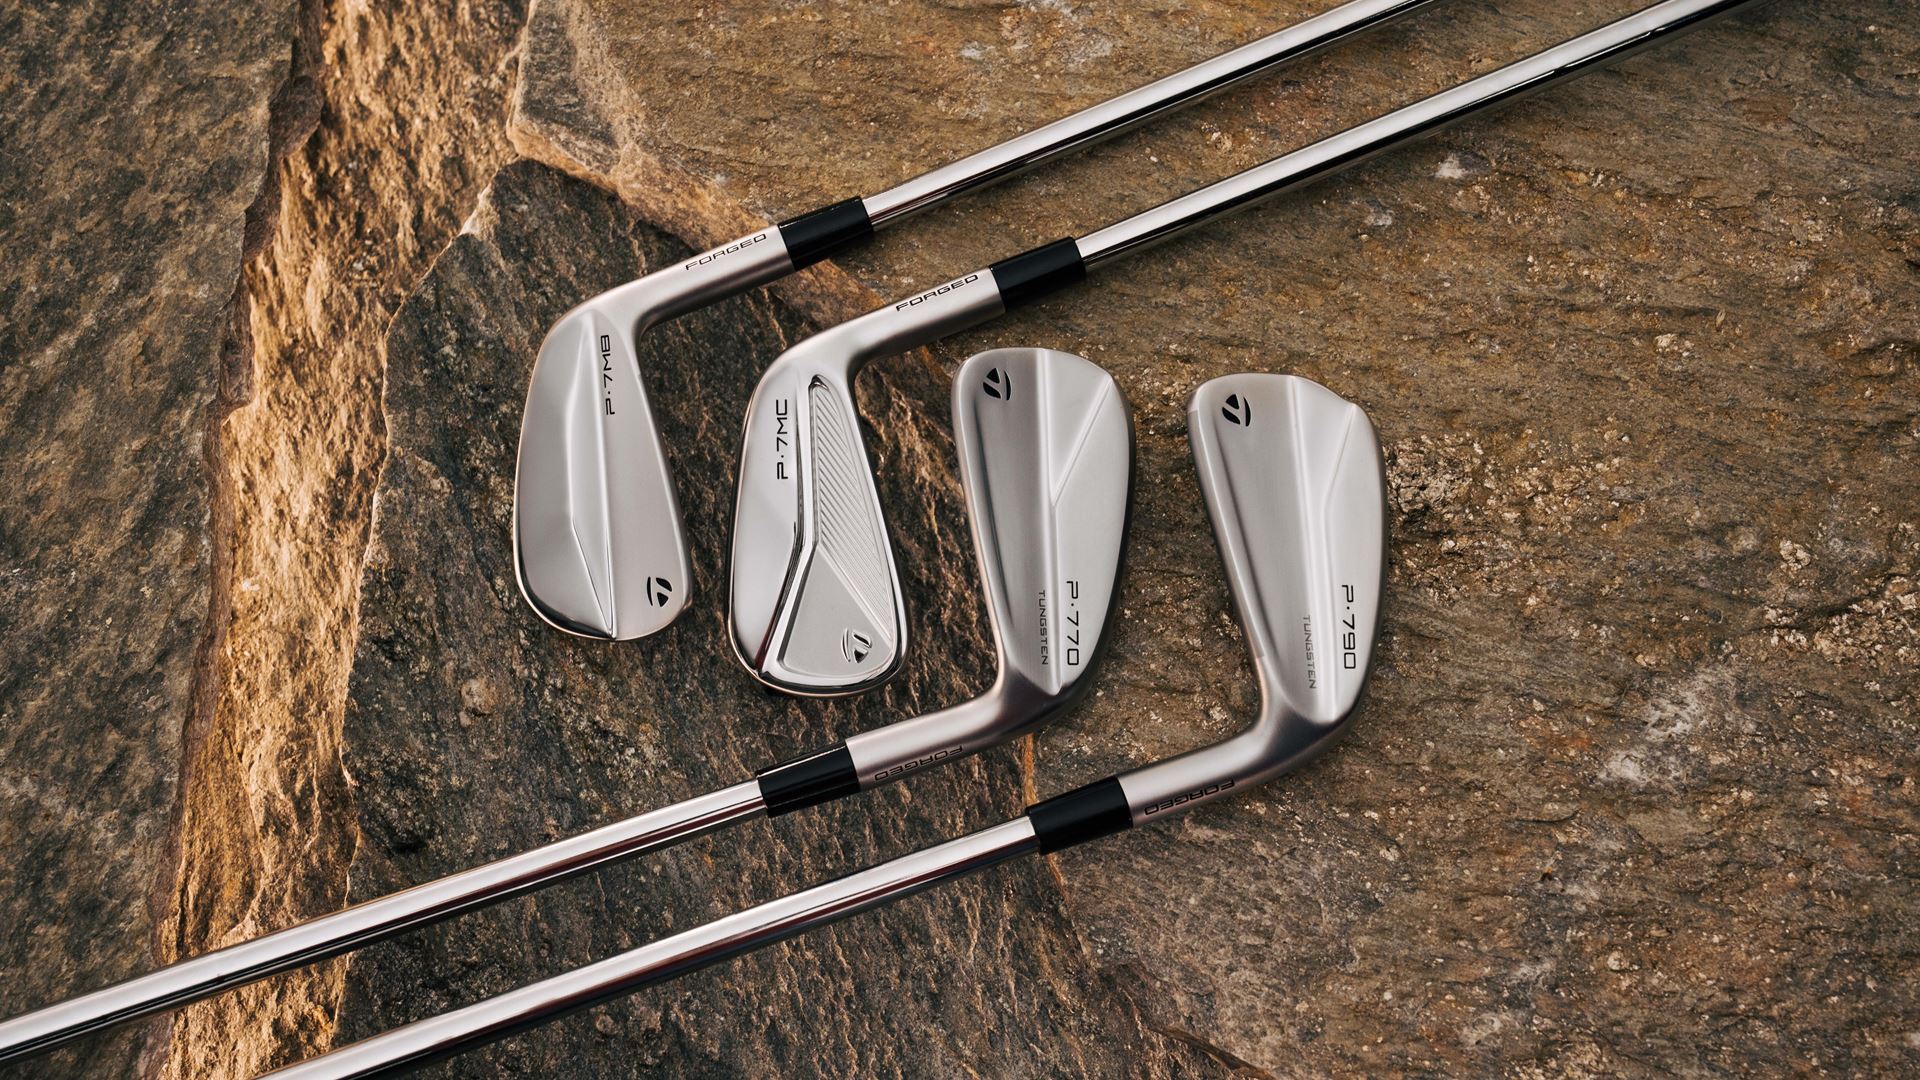 TaylorMade Golf Evolves the P·700 Series with the All-New P·770, P·7MC and P·7MB Irons